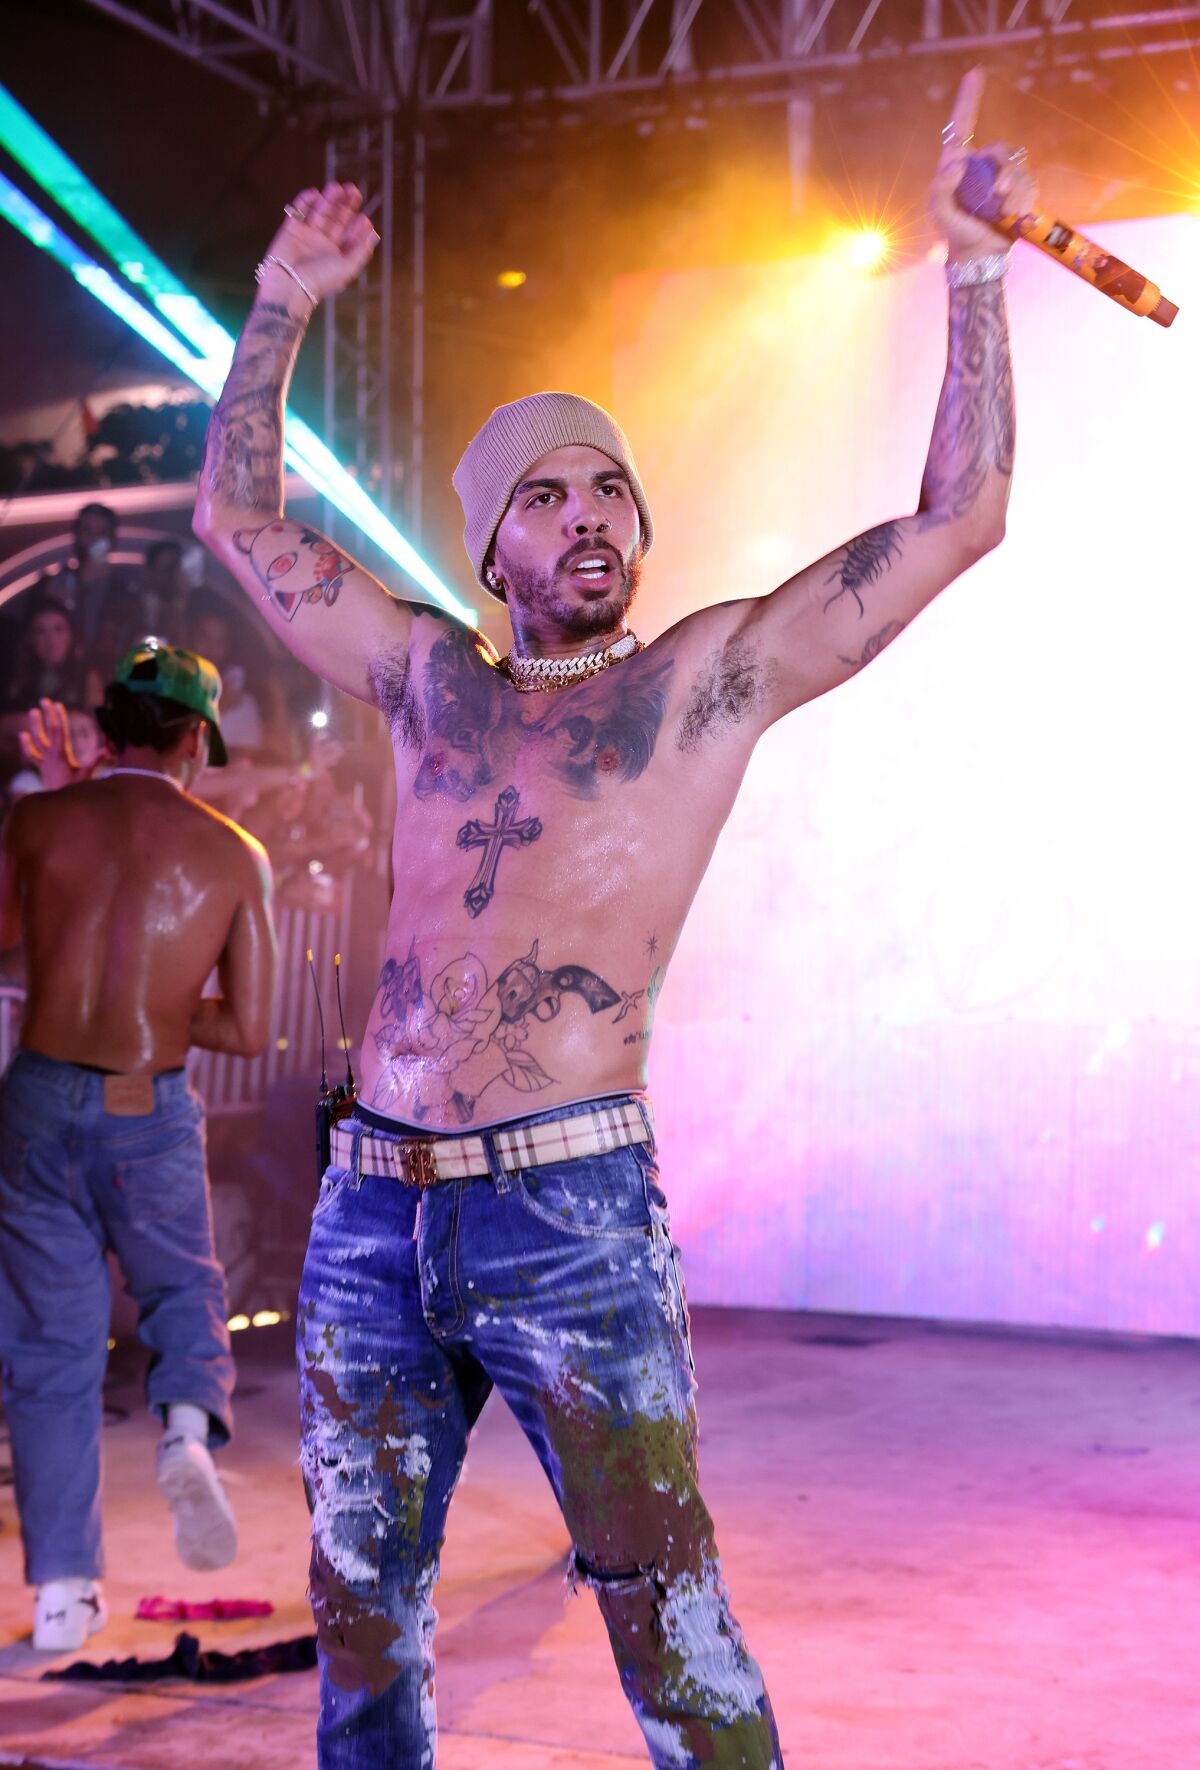 A man in jeans and no shirt performing onstage.